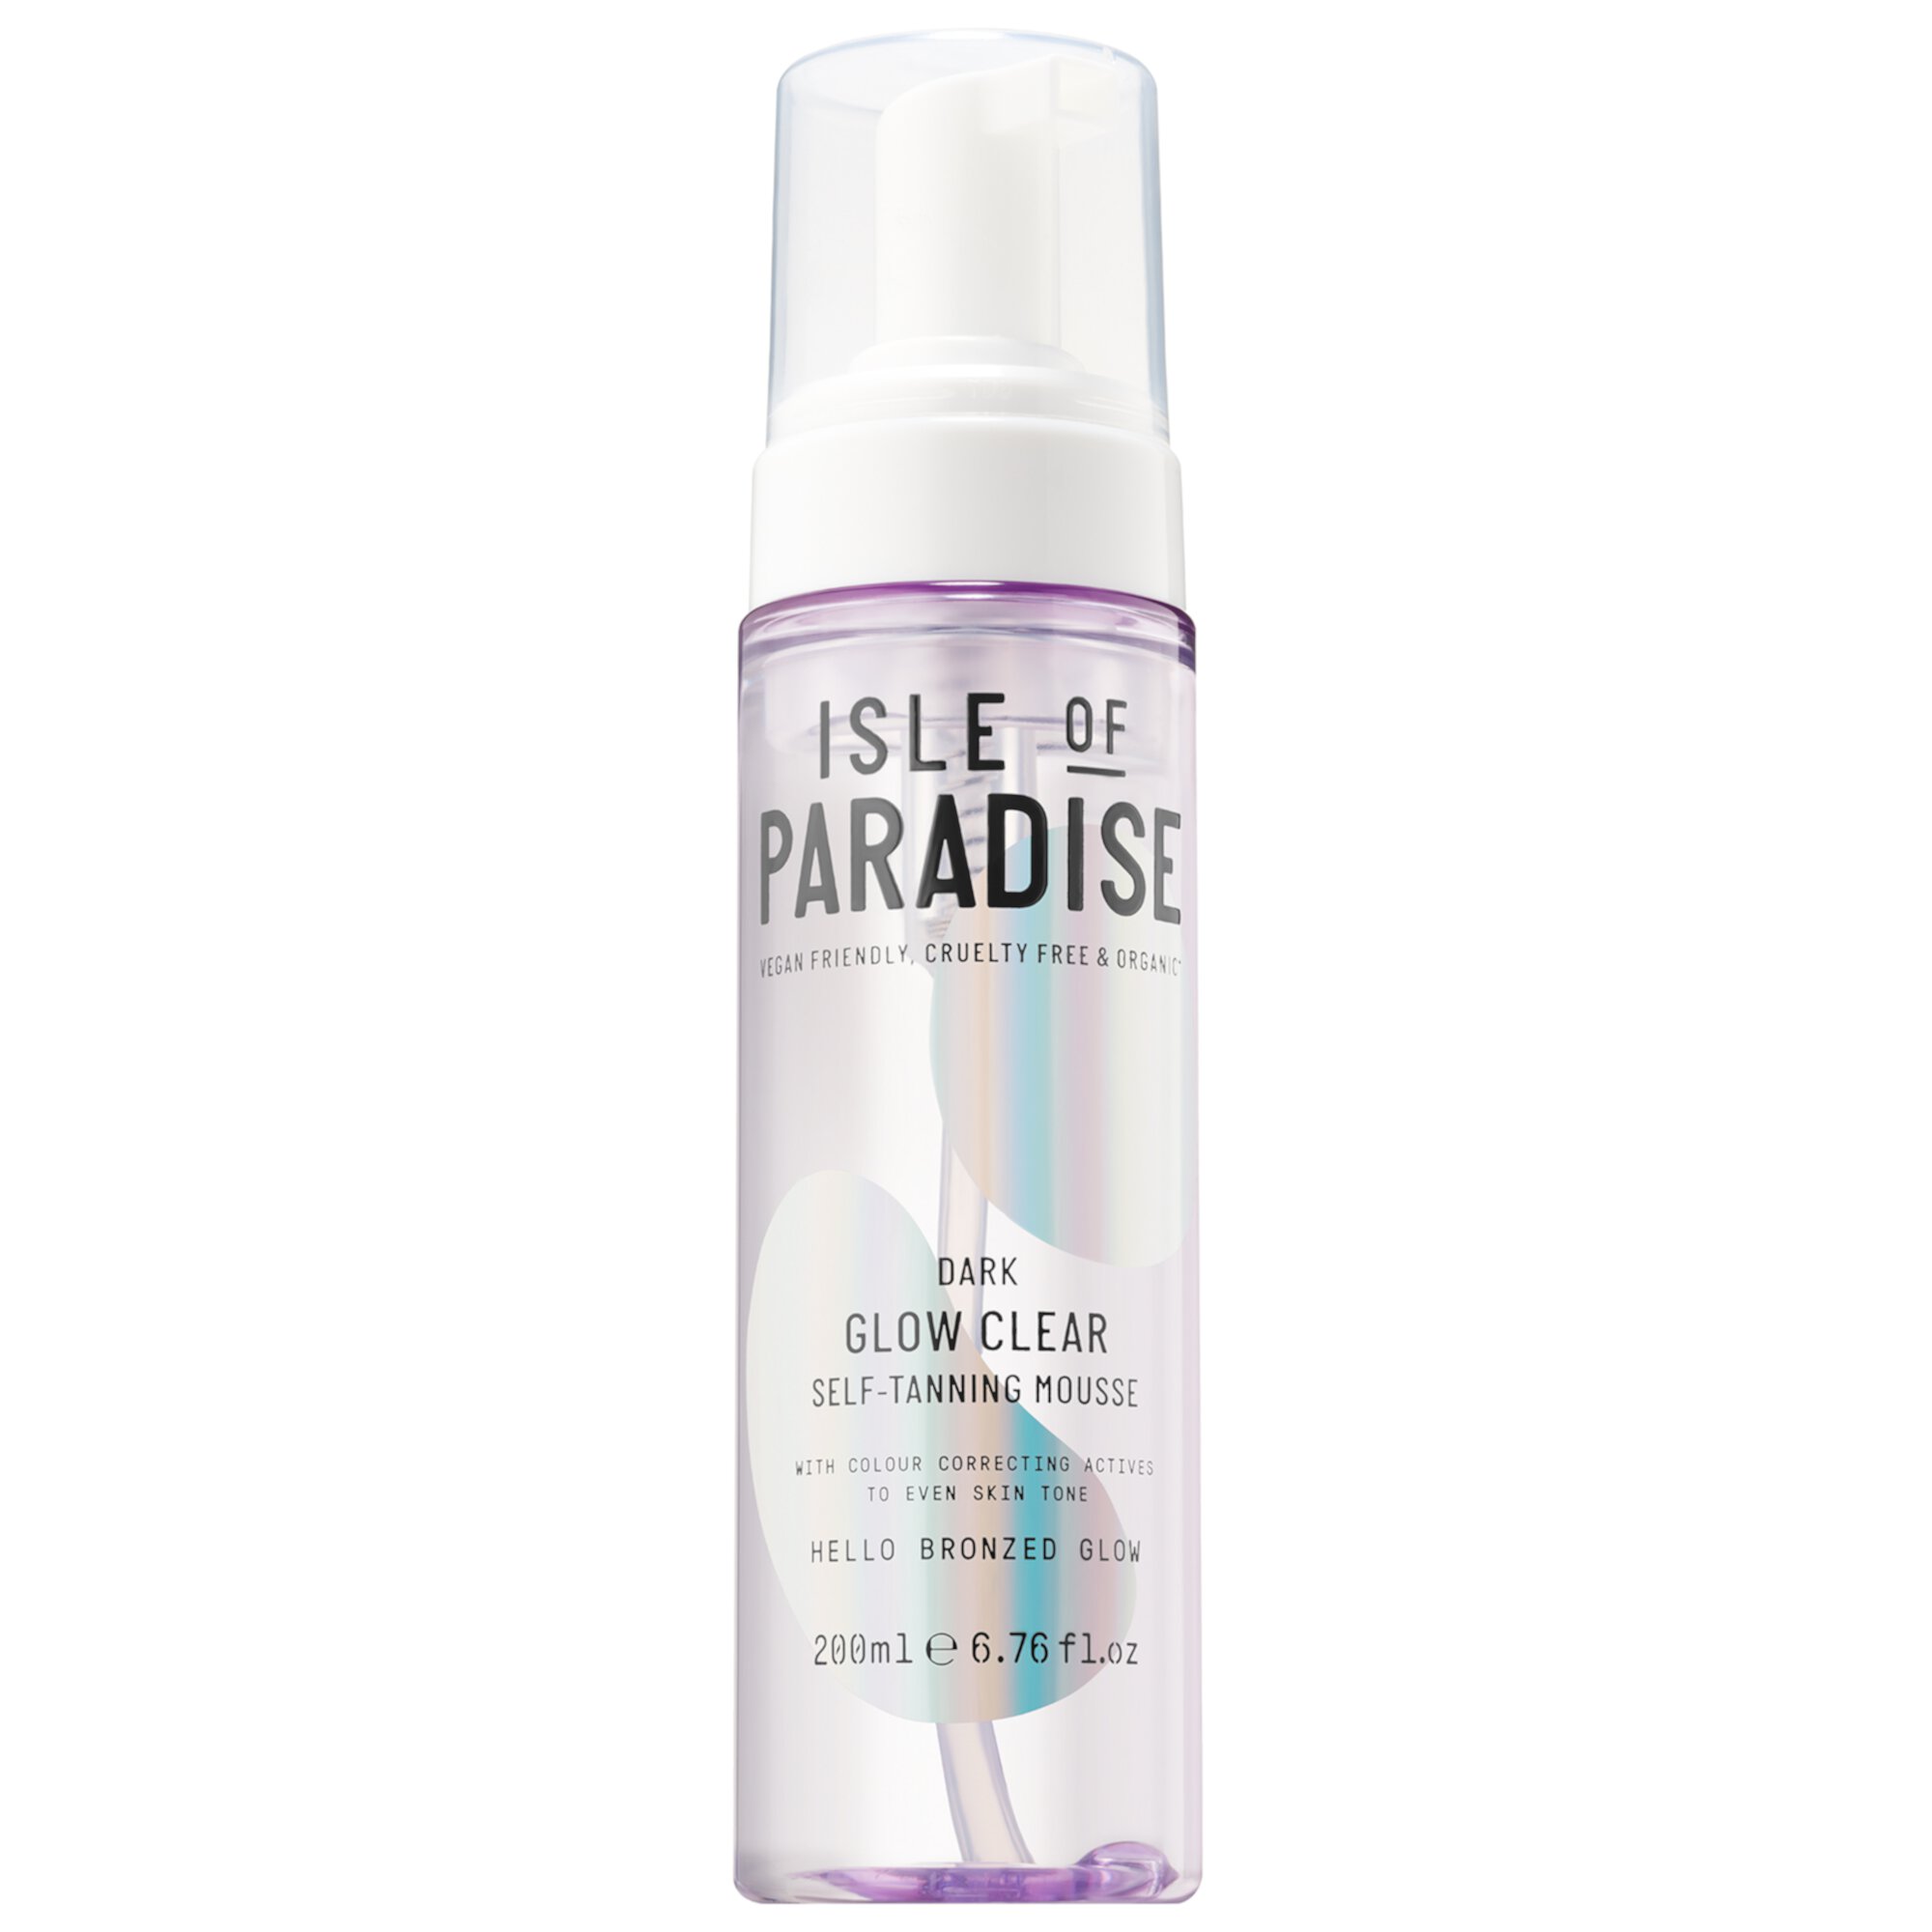 Glow Clear, Color Correcting Self-Tanning Mousse Isle of Paradise